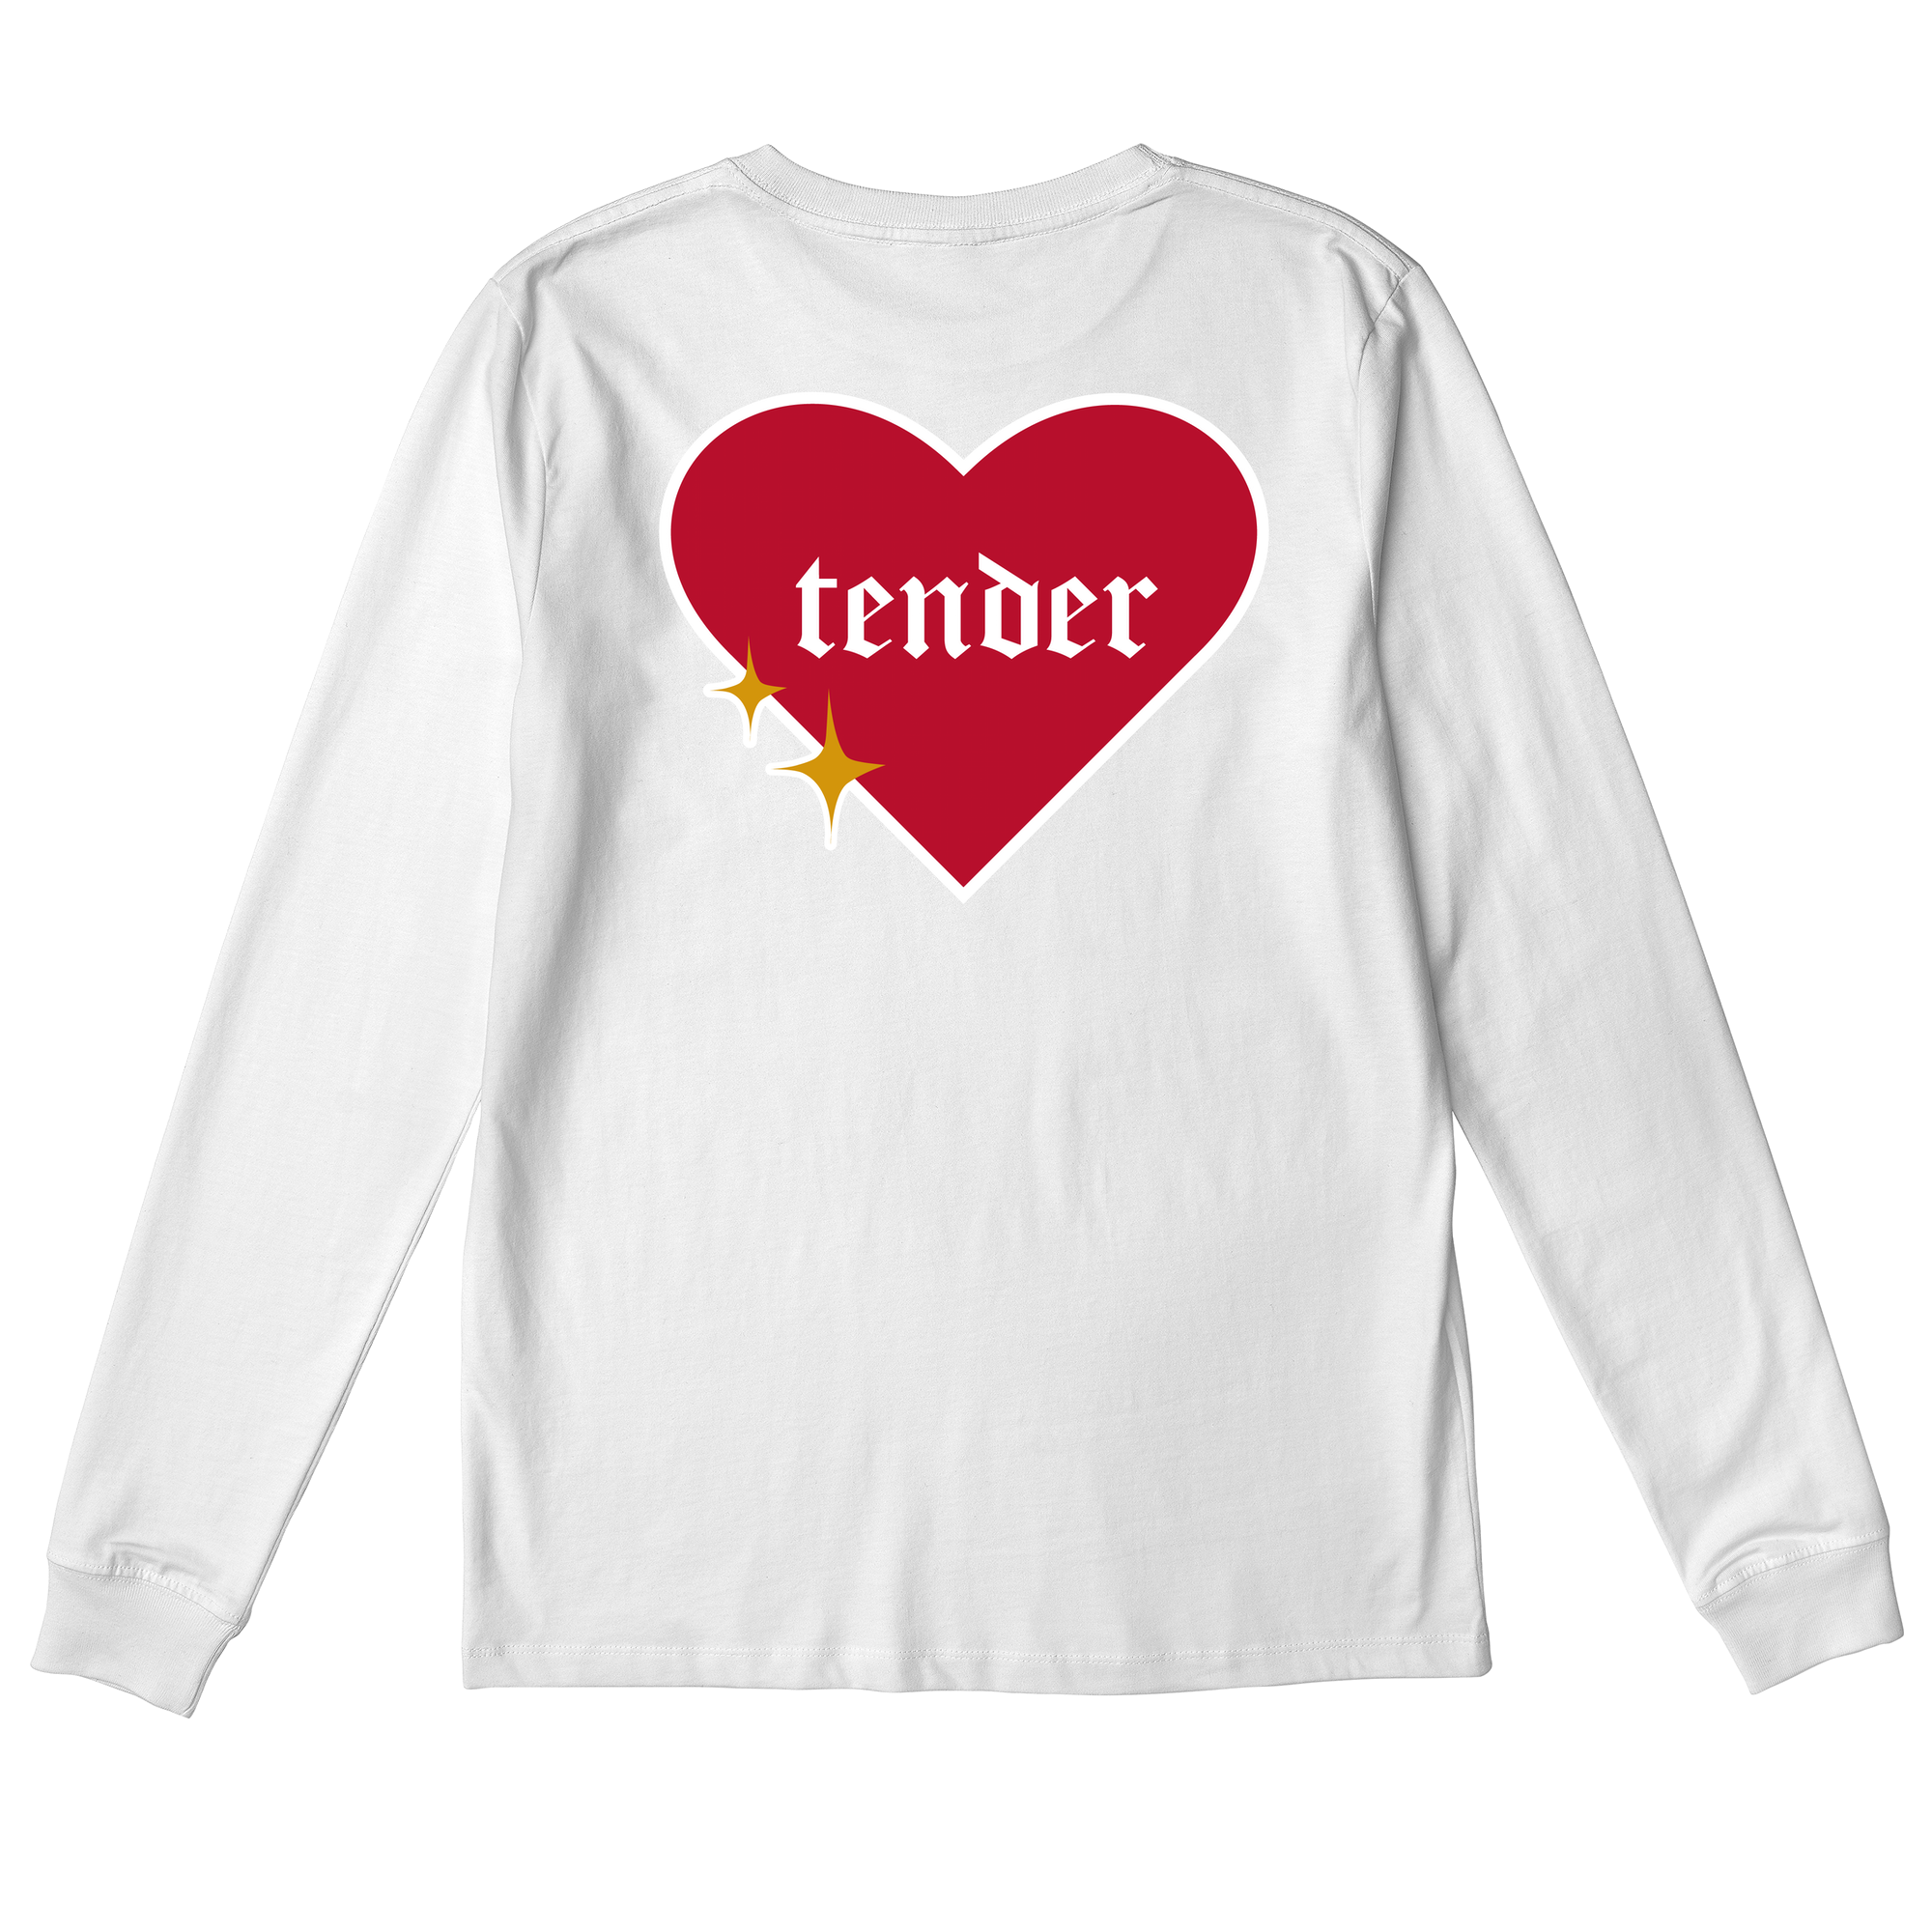 TENDER HEARTED - Organic Long Sleeve With Cuffs